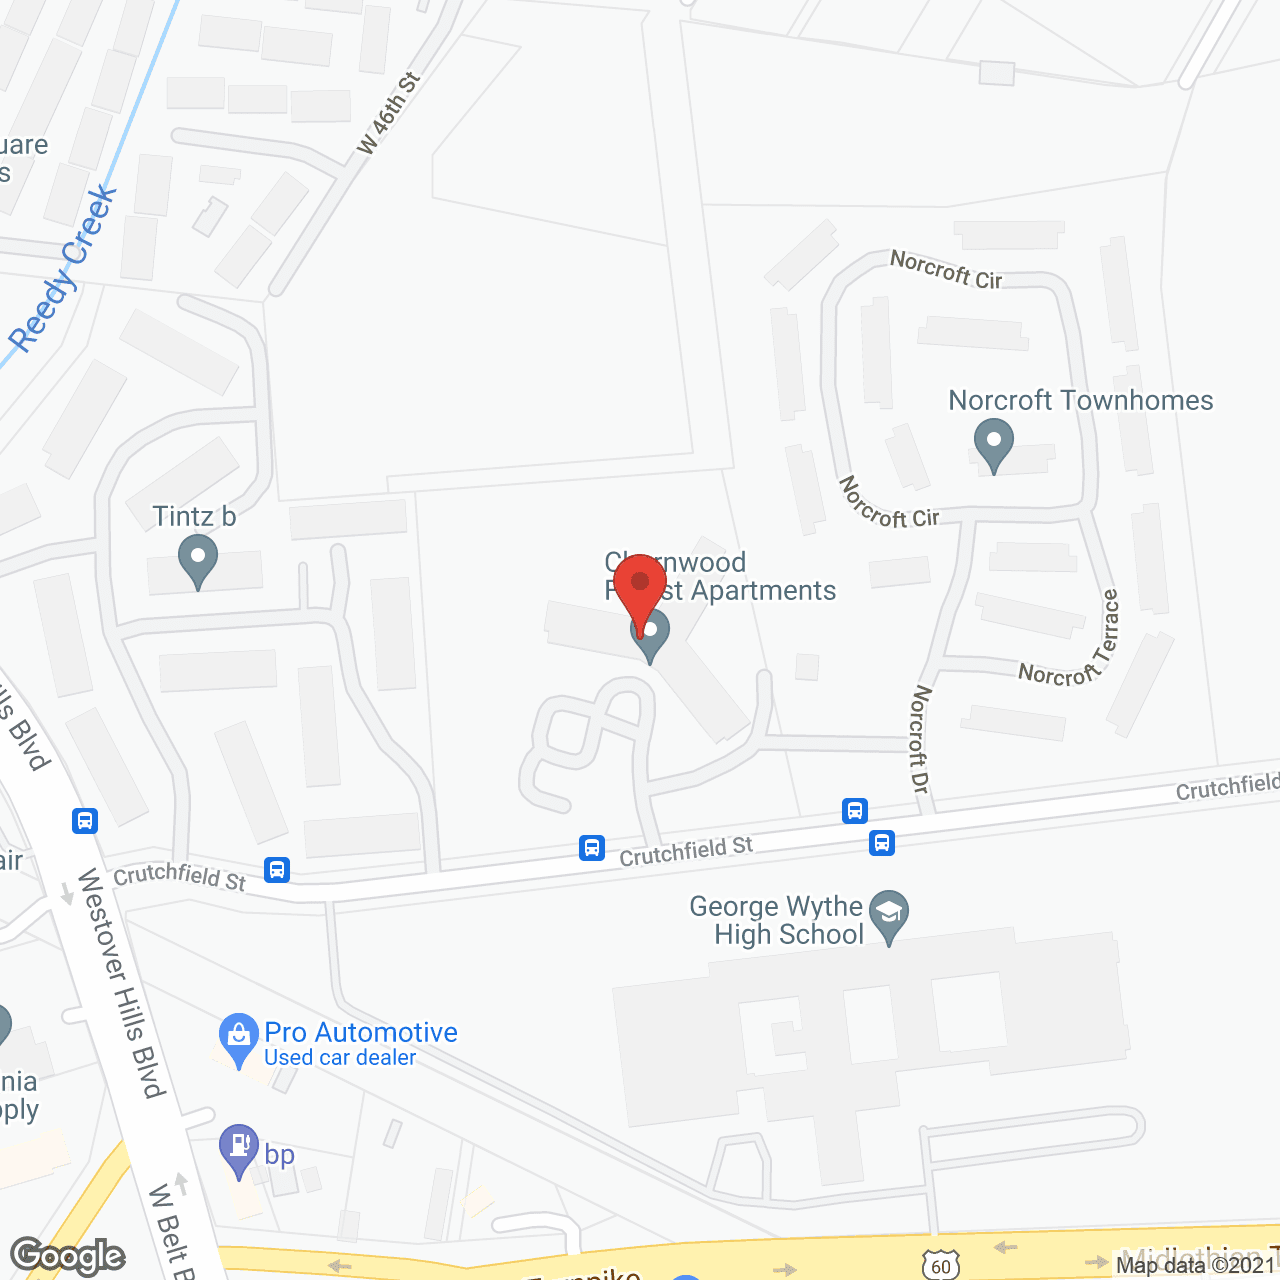 Charnwood Forest Apartments in google map